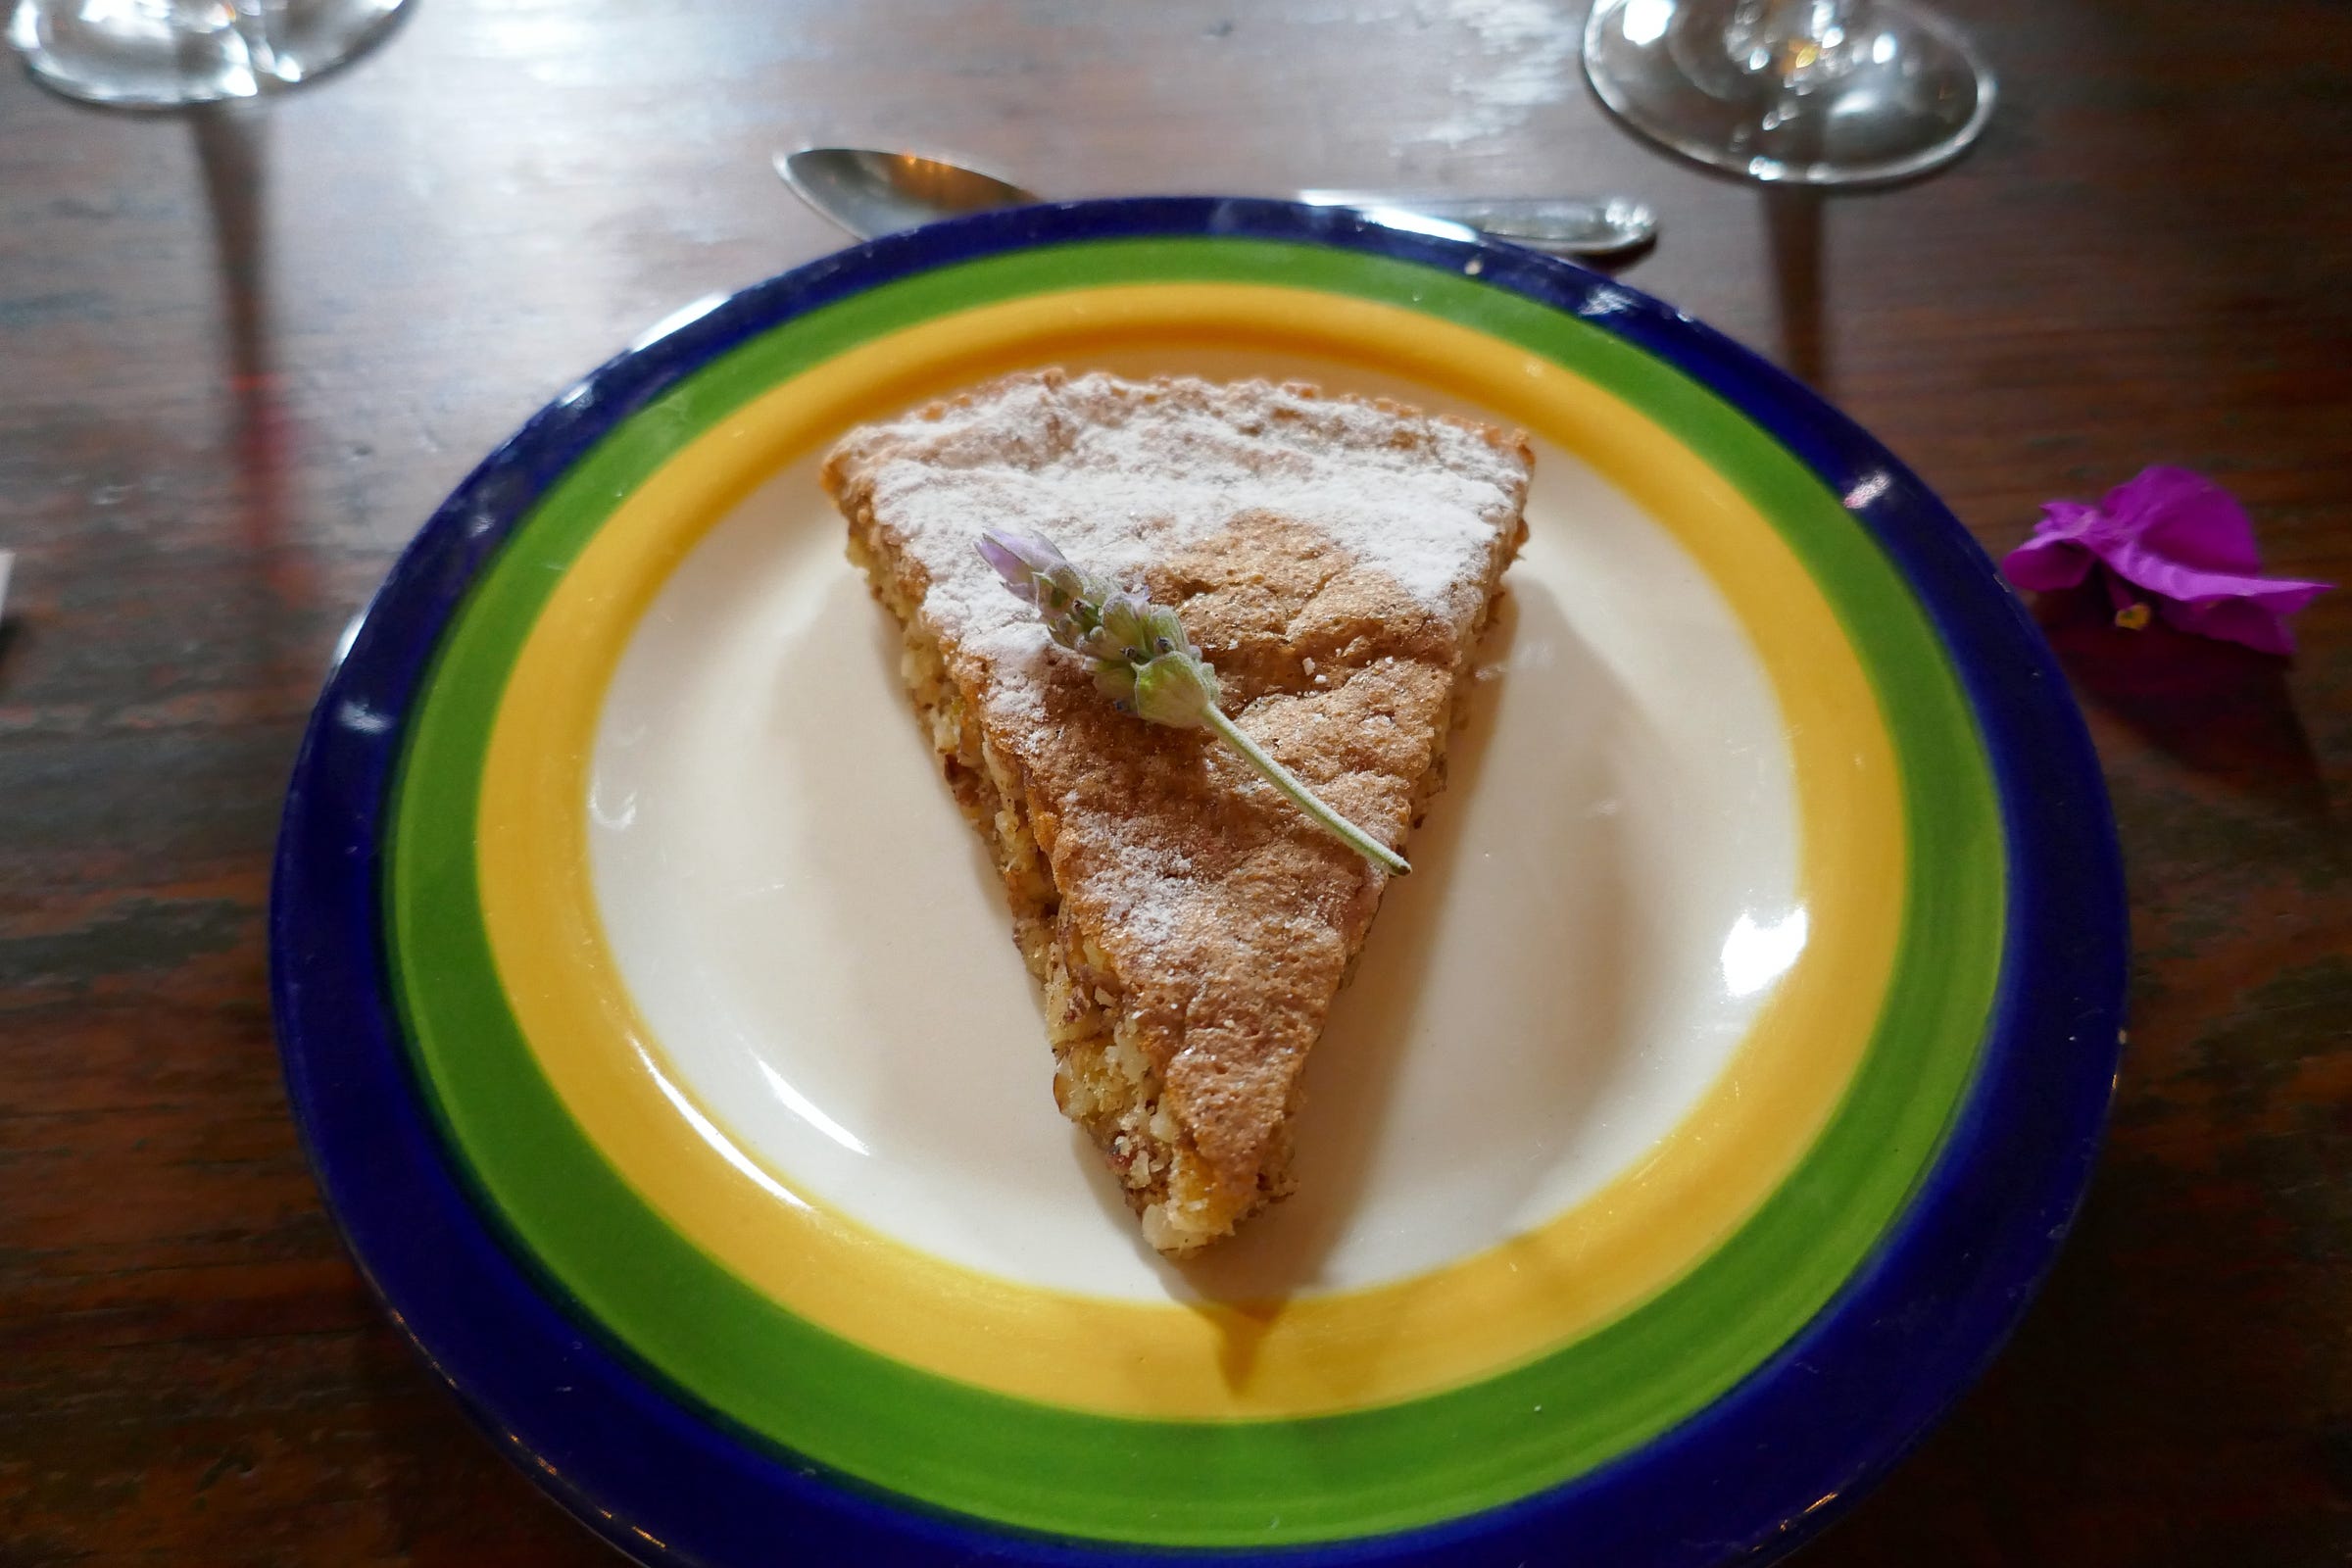 A slice of pie on a plate rimmed in dark blue, green, and yellow with a white center